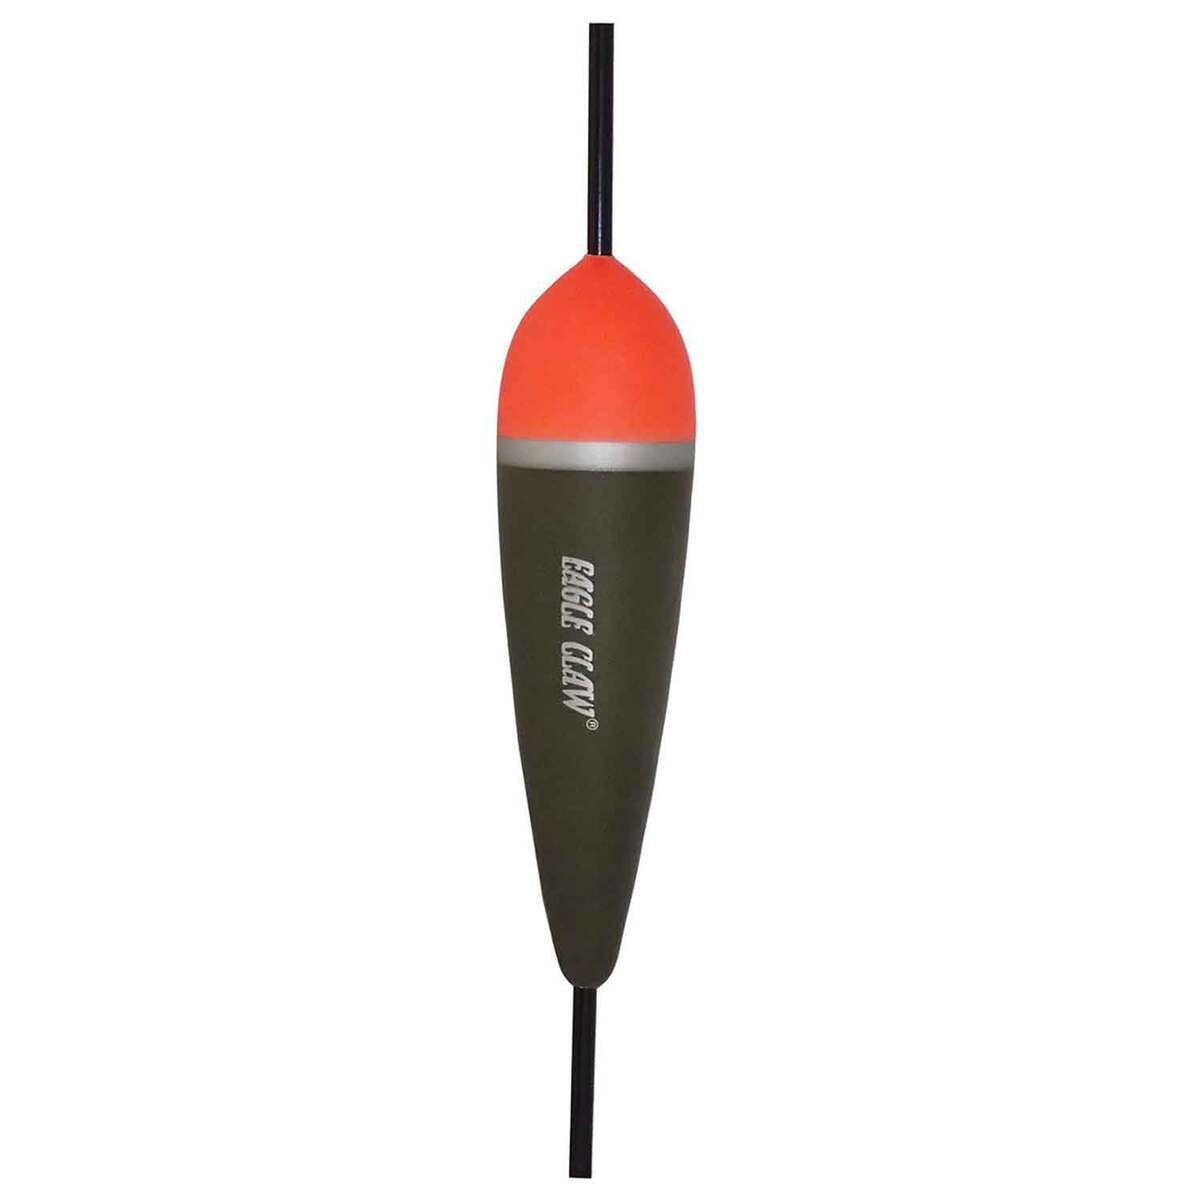 Thill Oval Tube Float in Orange